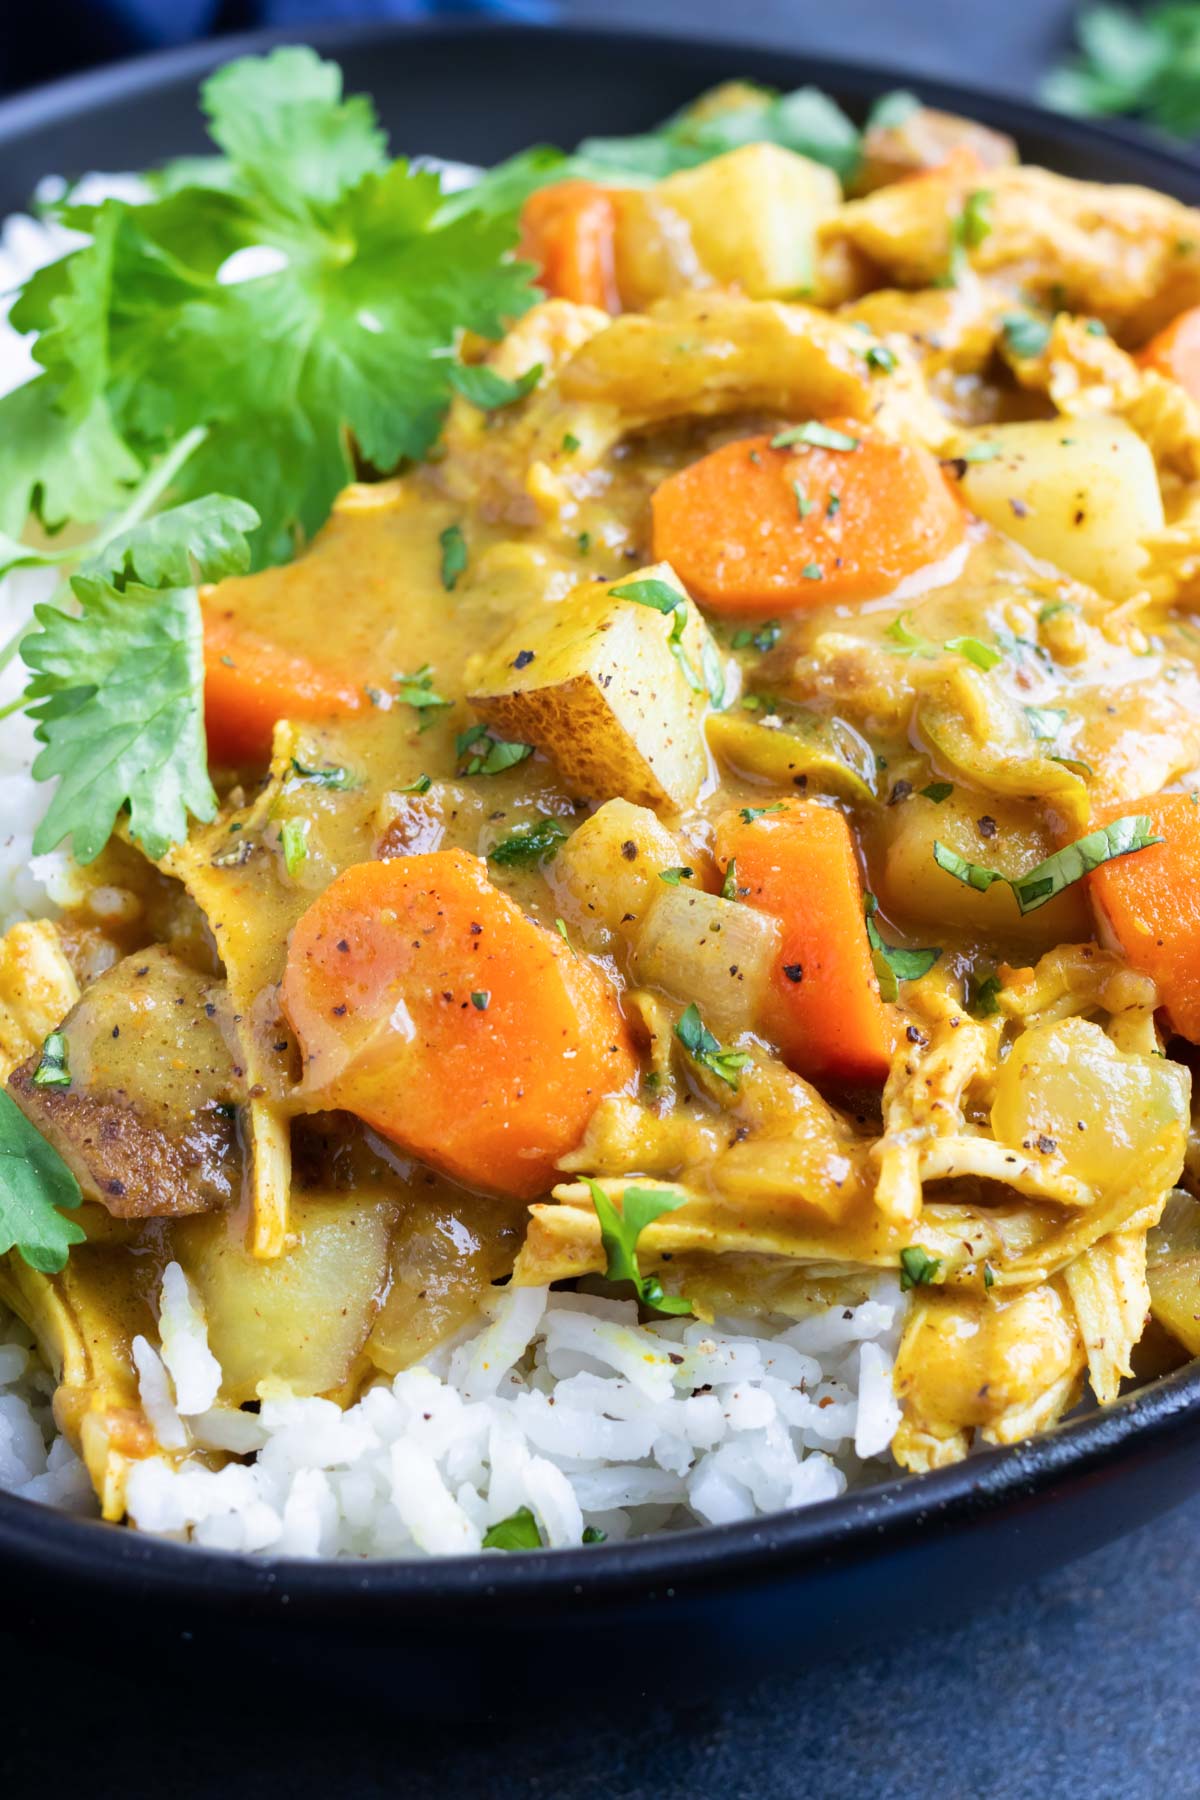 Yellow curry with shredded chicken, coconut milk, cream, carrots, and potatoes, being served as a quick and easy Instant Pot dinner recipe.